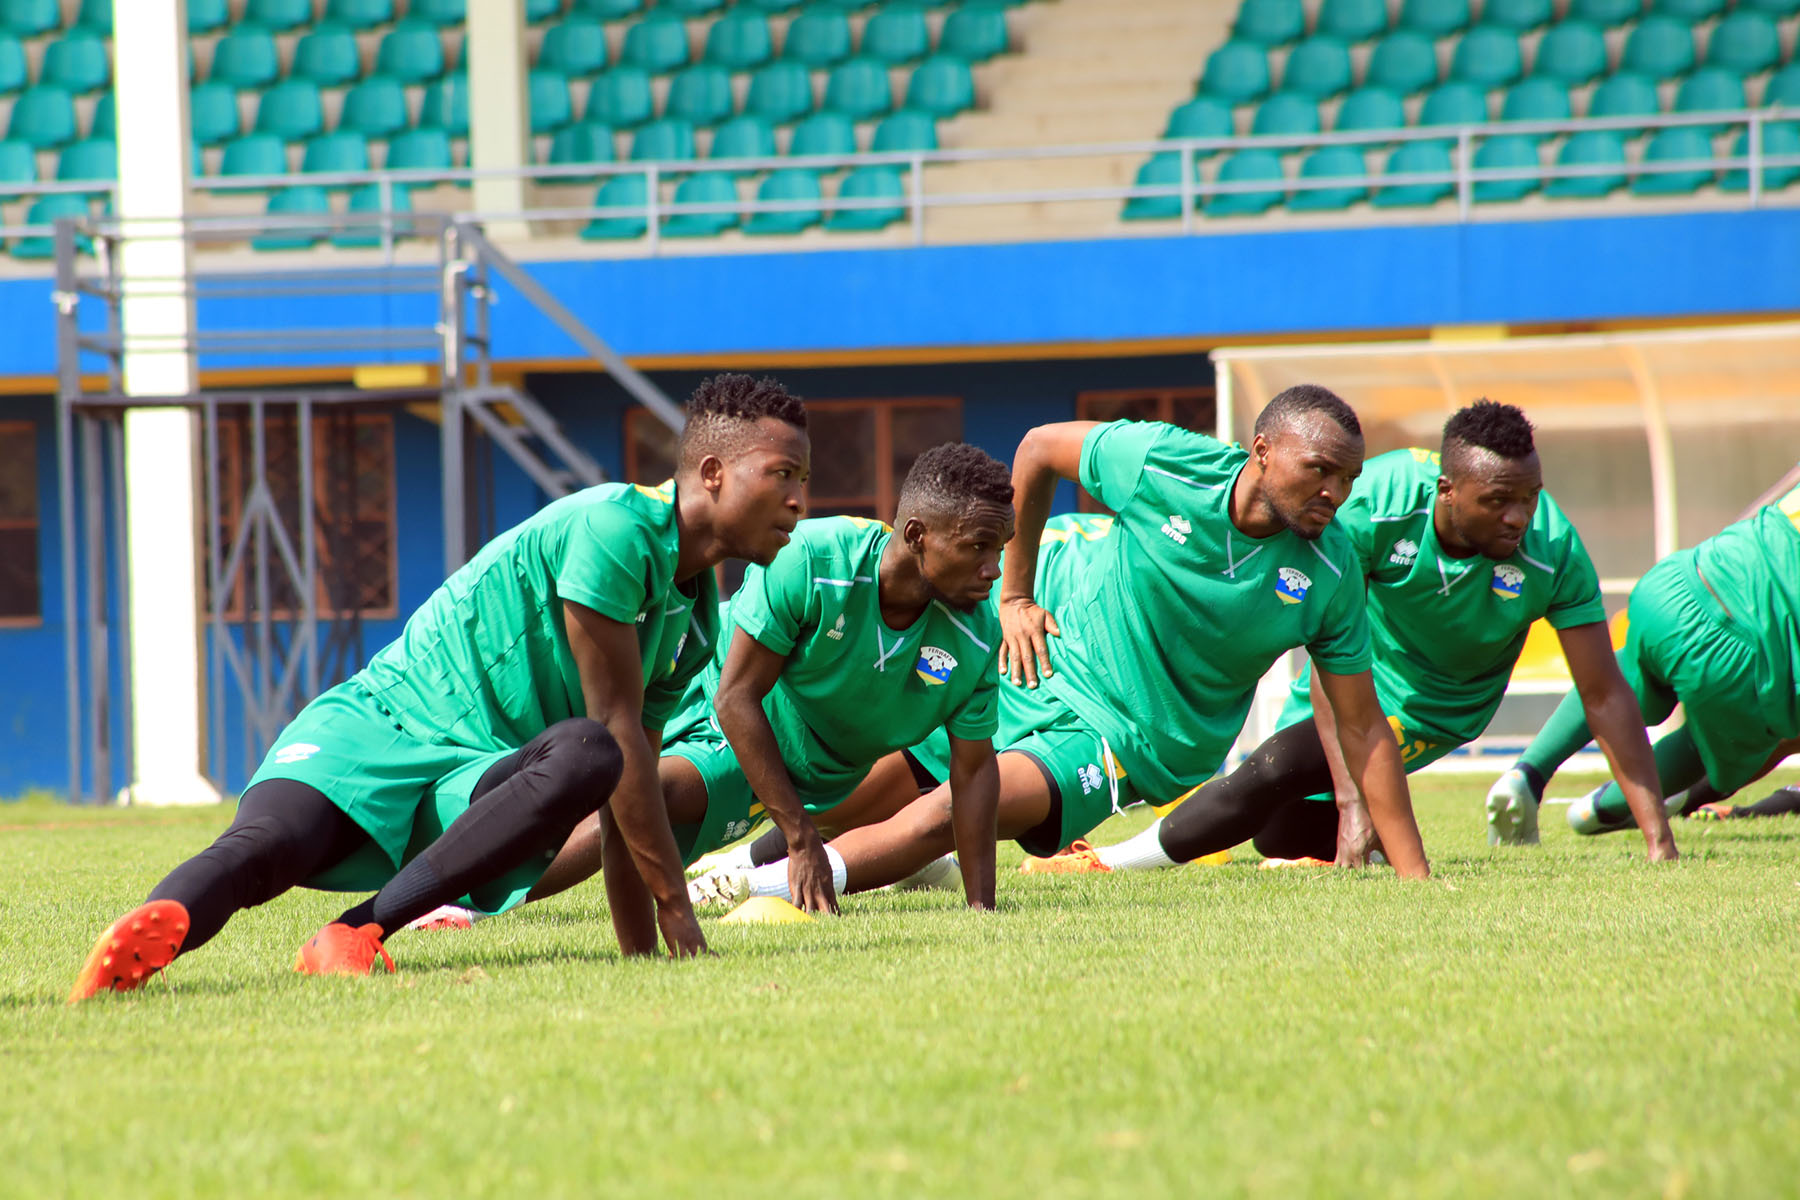 Amavubi senor team players during a training session at Amahoro Stadium on December 29. They face  Congo-Brazzaville in the first of two friendly matches on Thursday, January 7 (Courtesy)